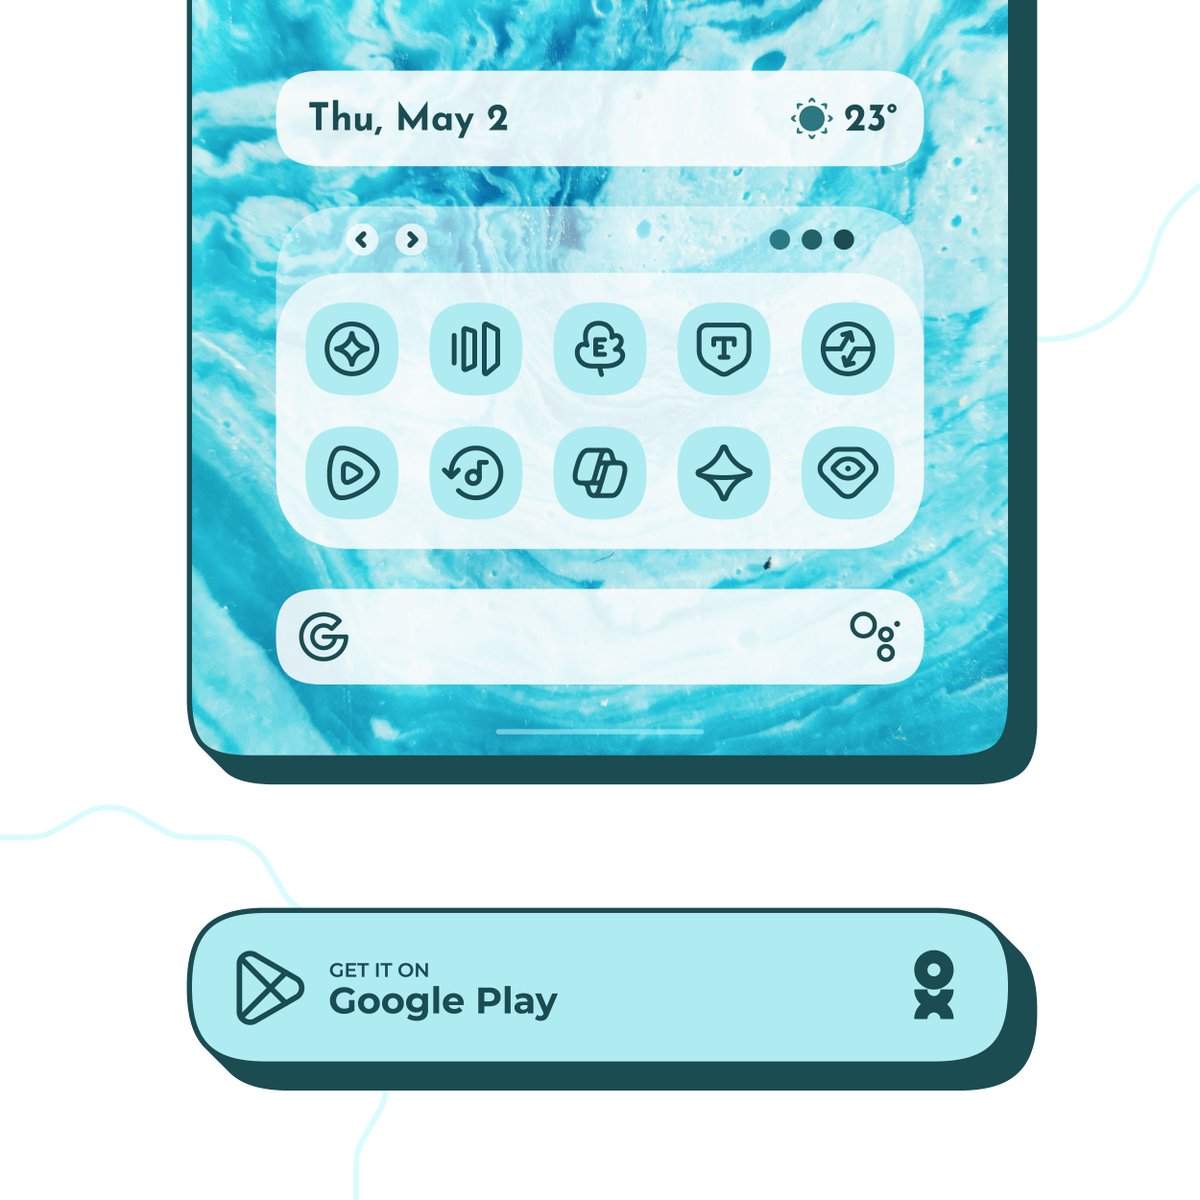 #EPIK MATERIAL YOU | New update available on Play Store and Free for a limited time🥳🥳🥳 • Added 125 new #icons • Fixed some icons not applying automatically Get it here: bit.ly/epik_icons 🌟 Your ❤️ and Retweet are Treasures! 🌟